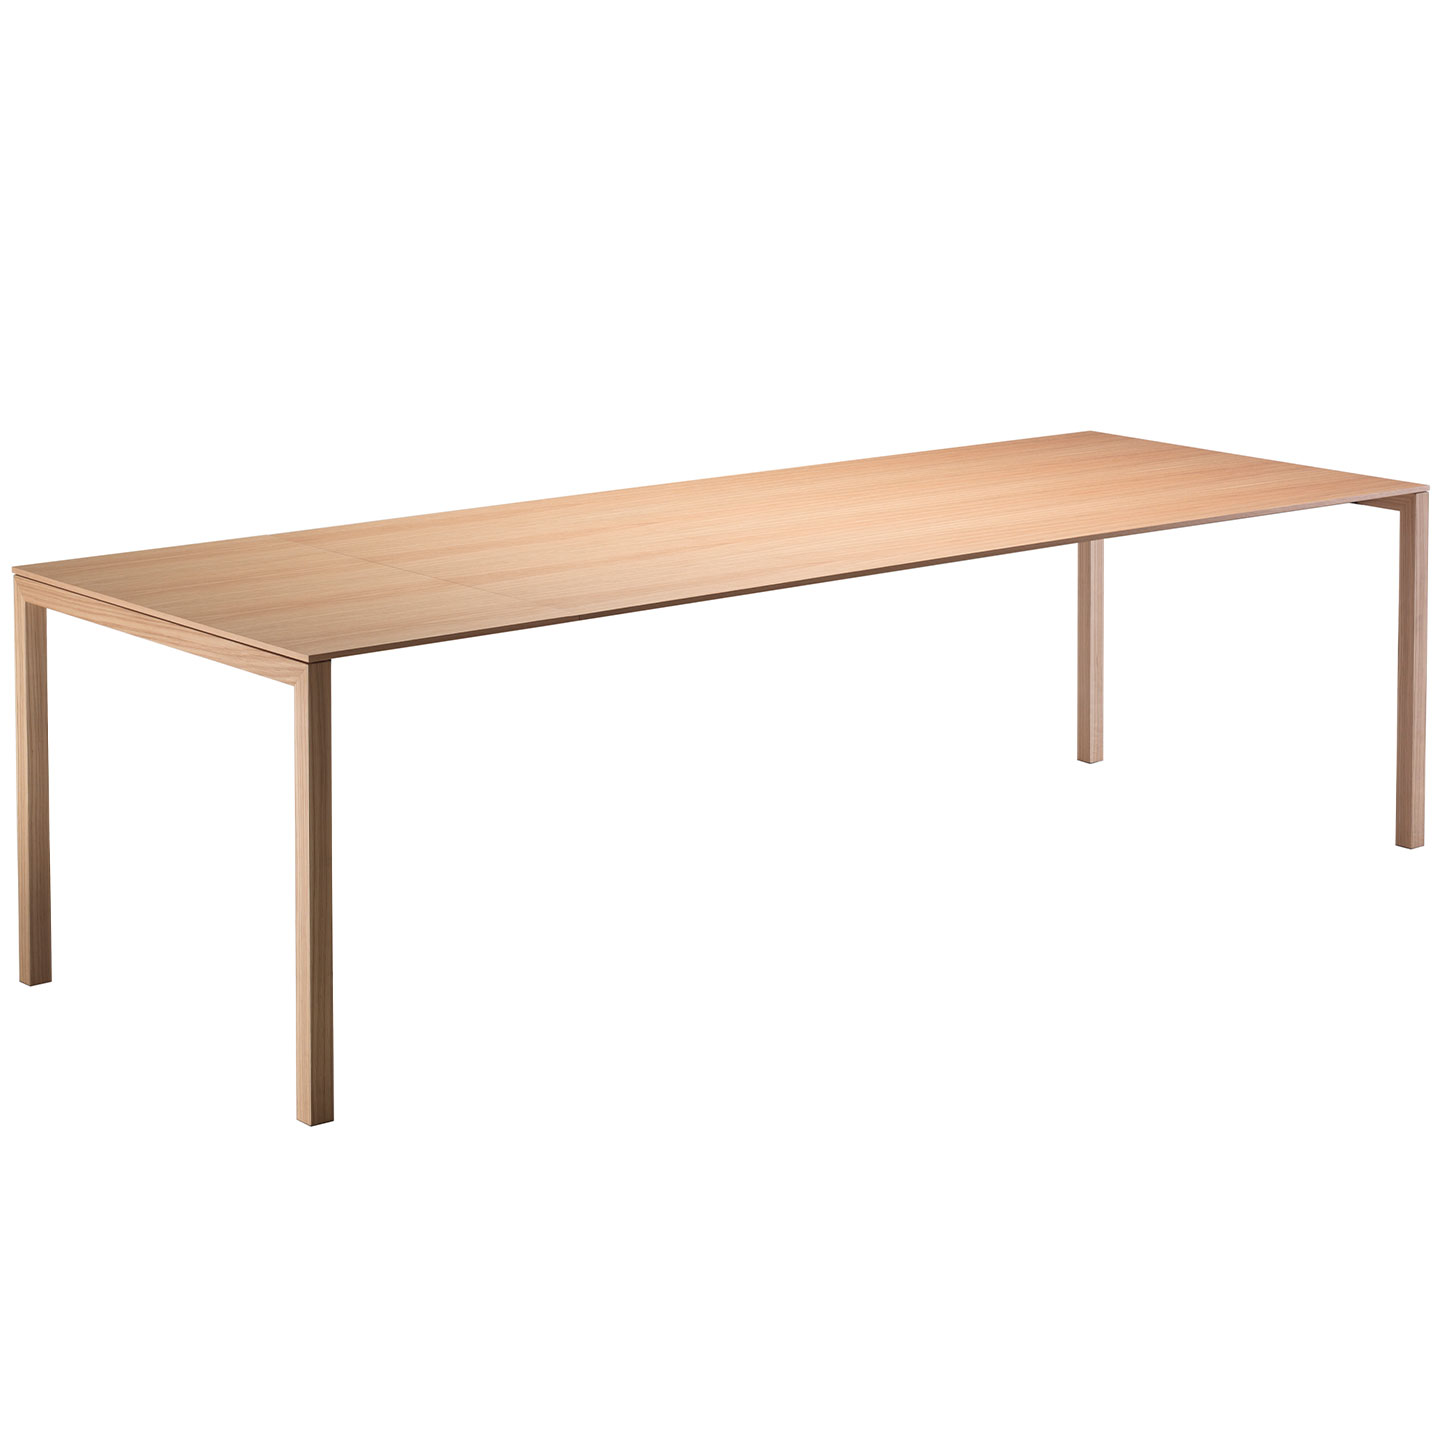 Haworth Naan Table with Natural Oak wood rectangular top and 4 legs